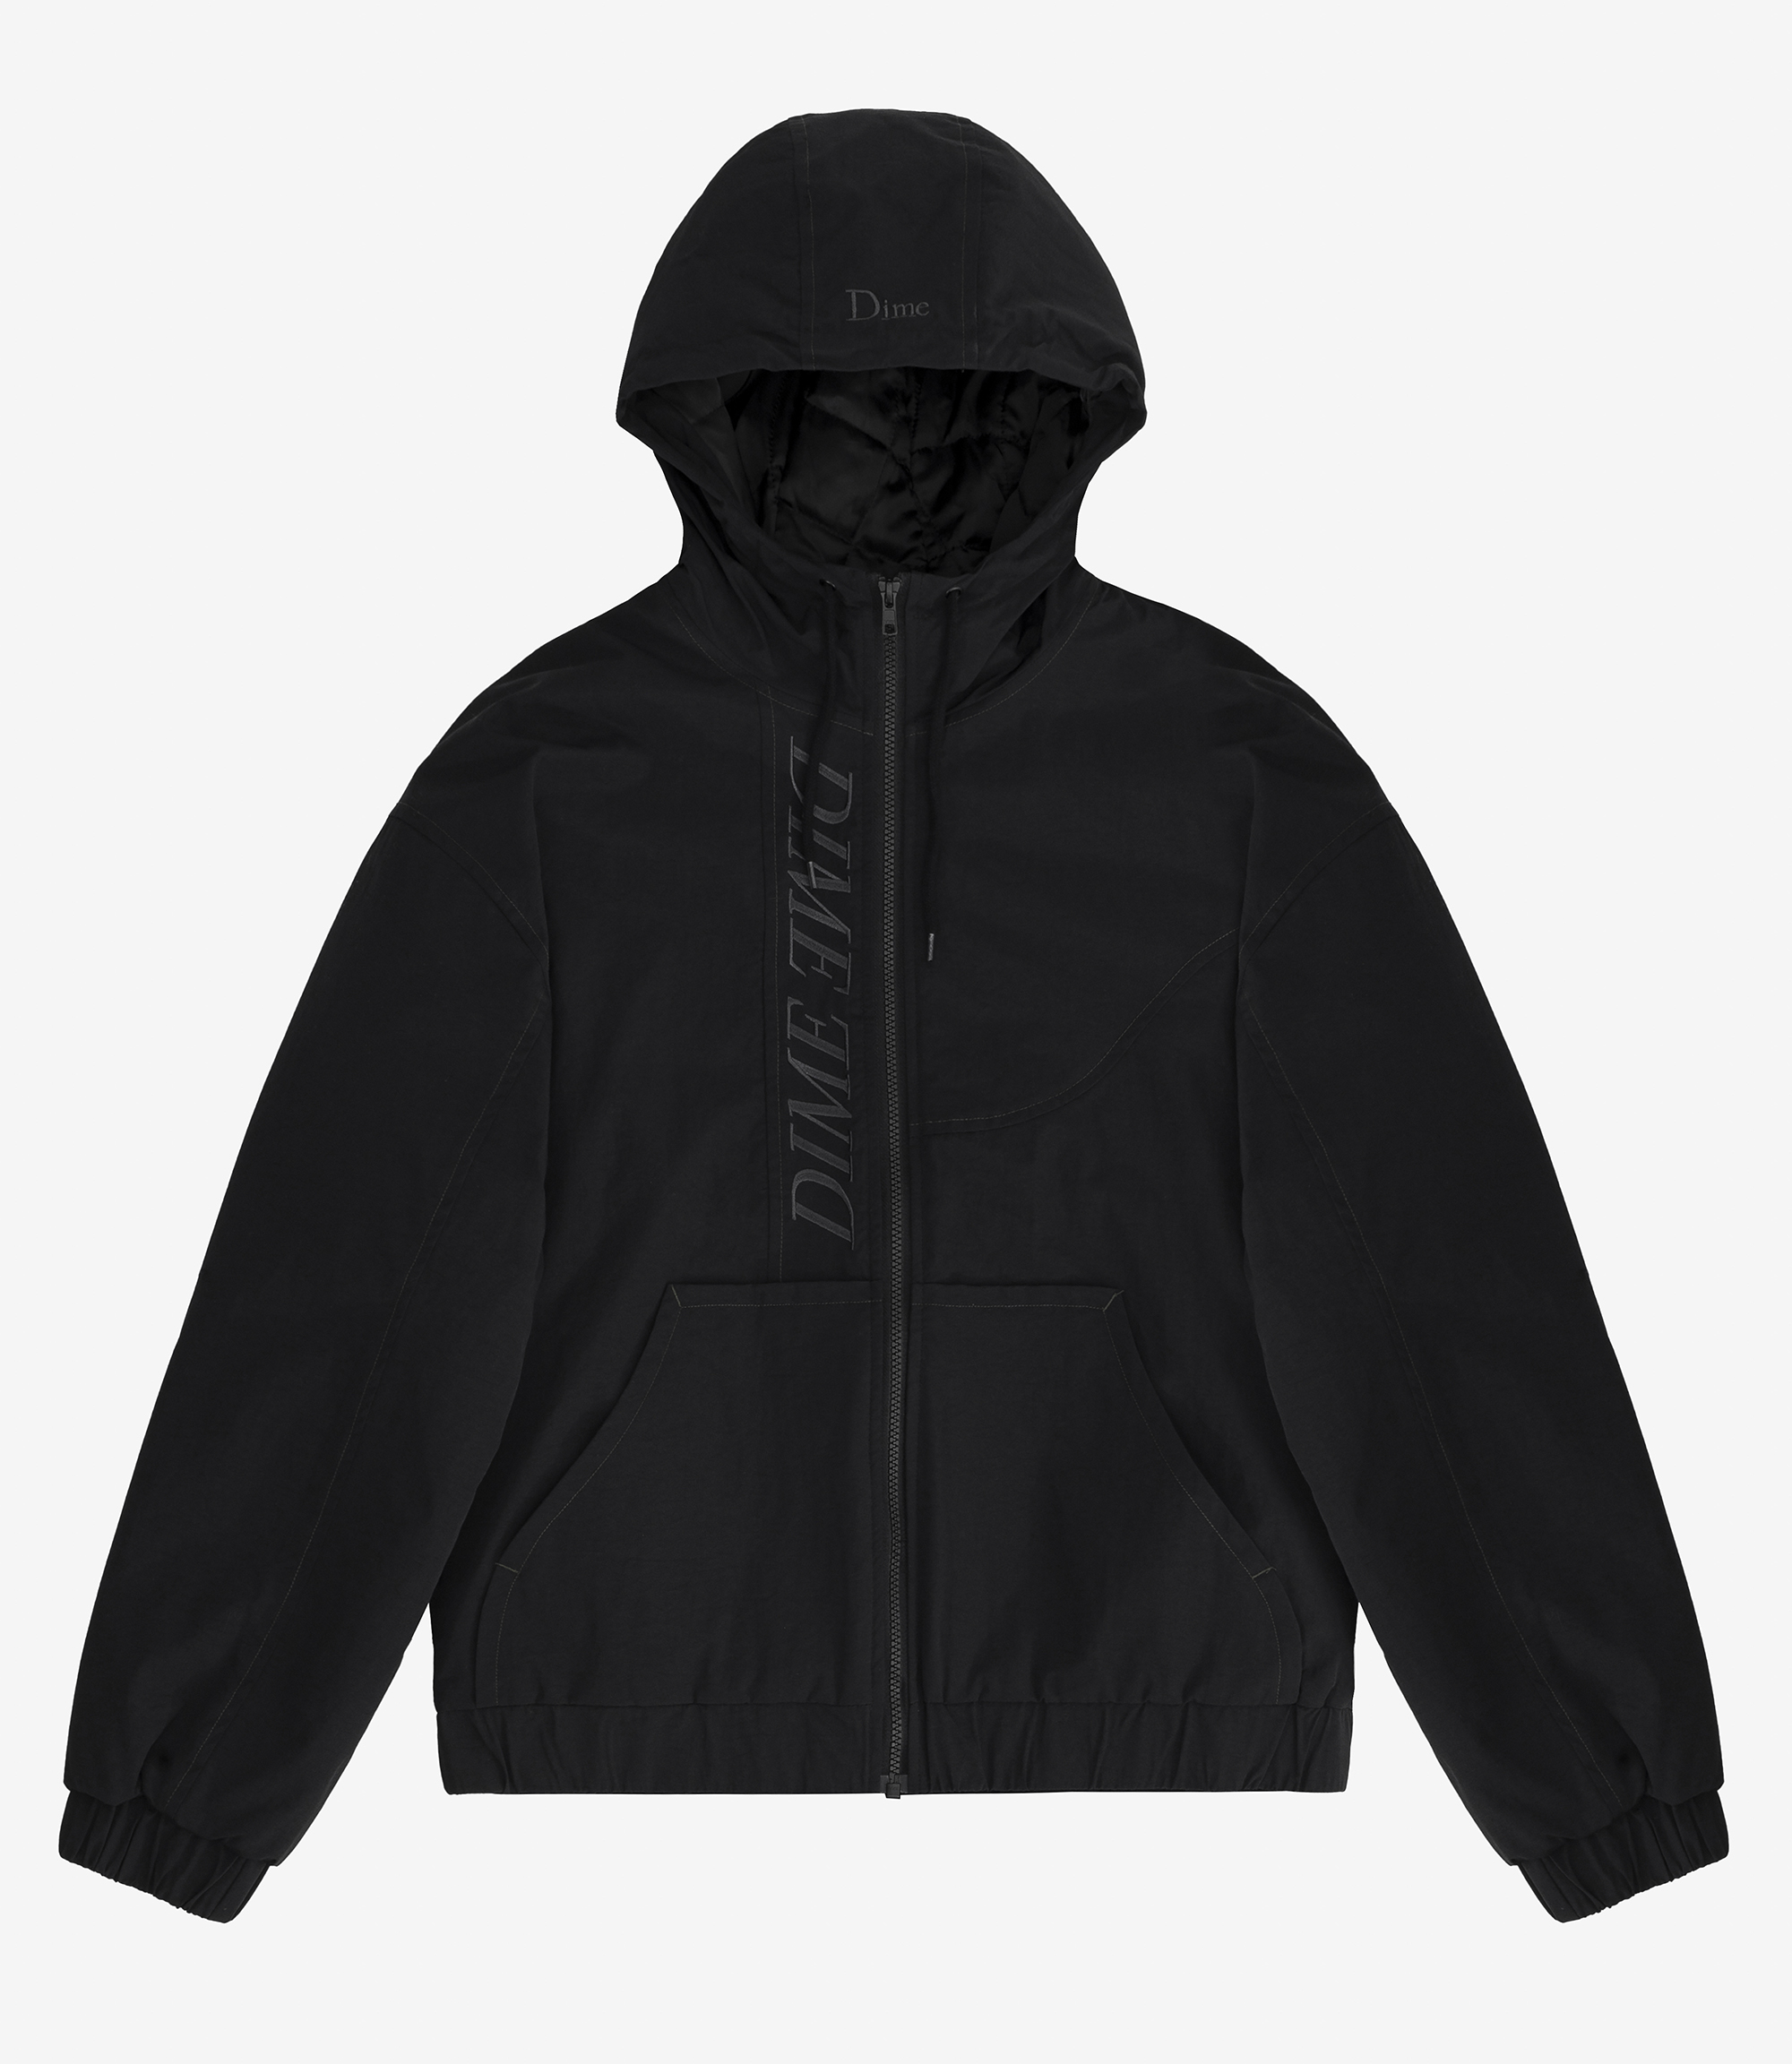 Dime quilted hooded jaket black Mサイズ